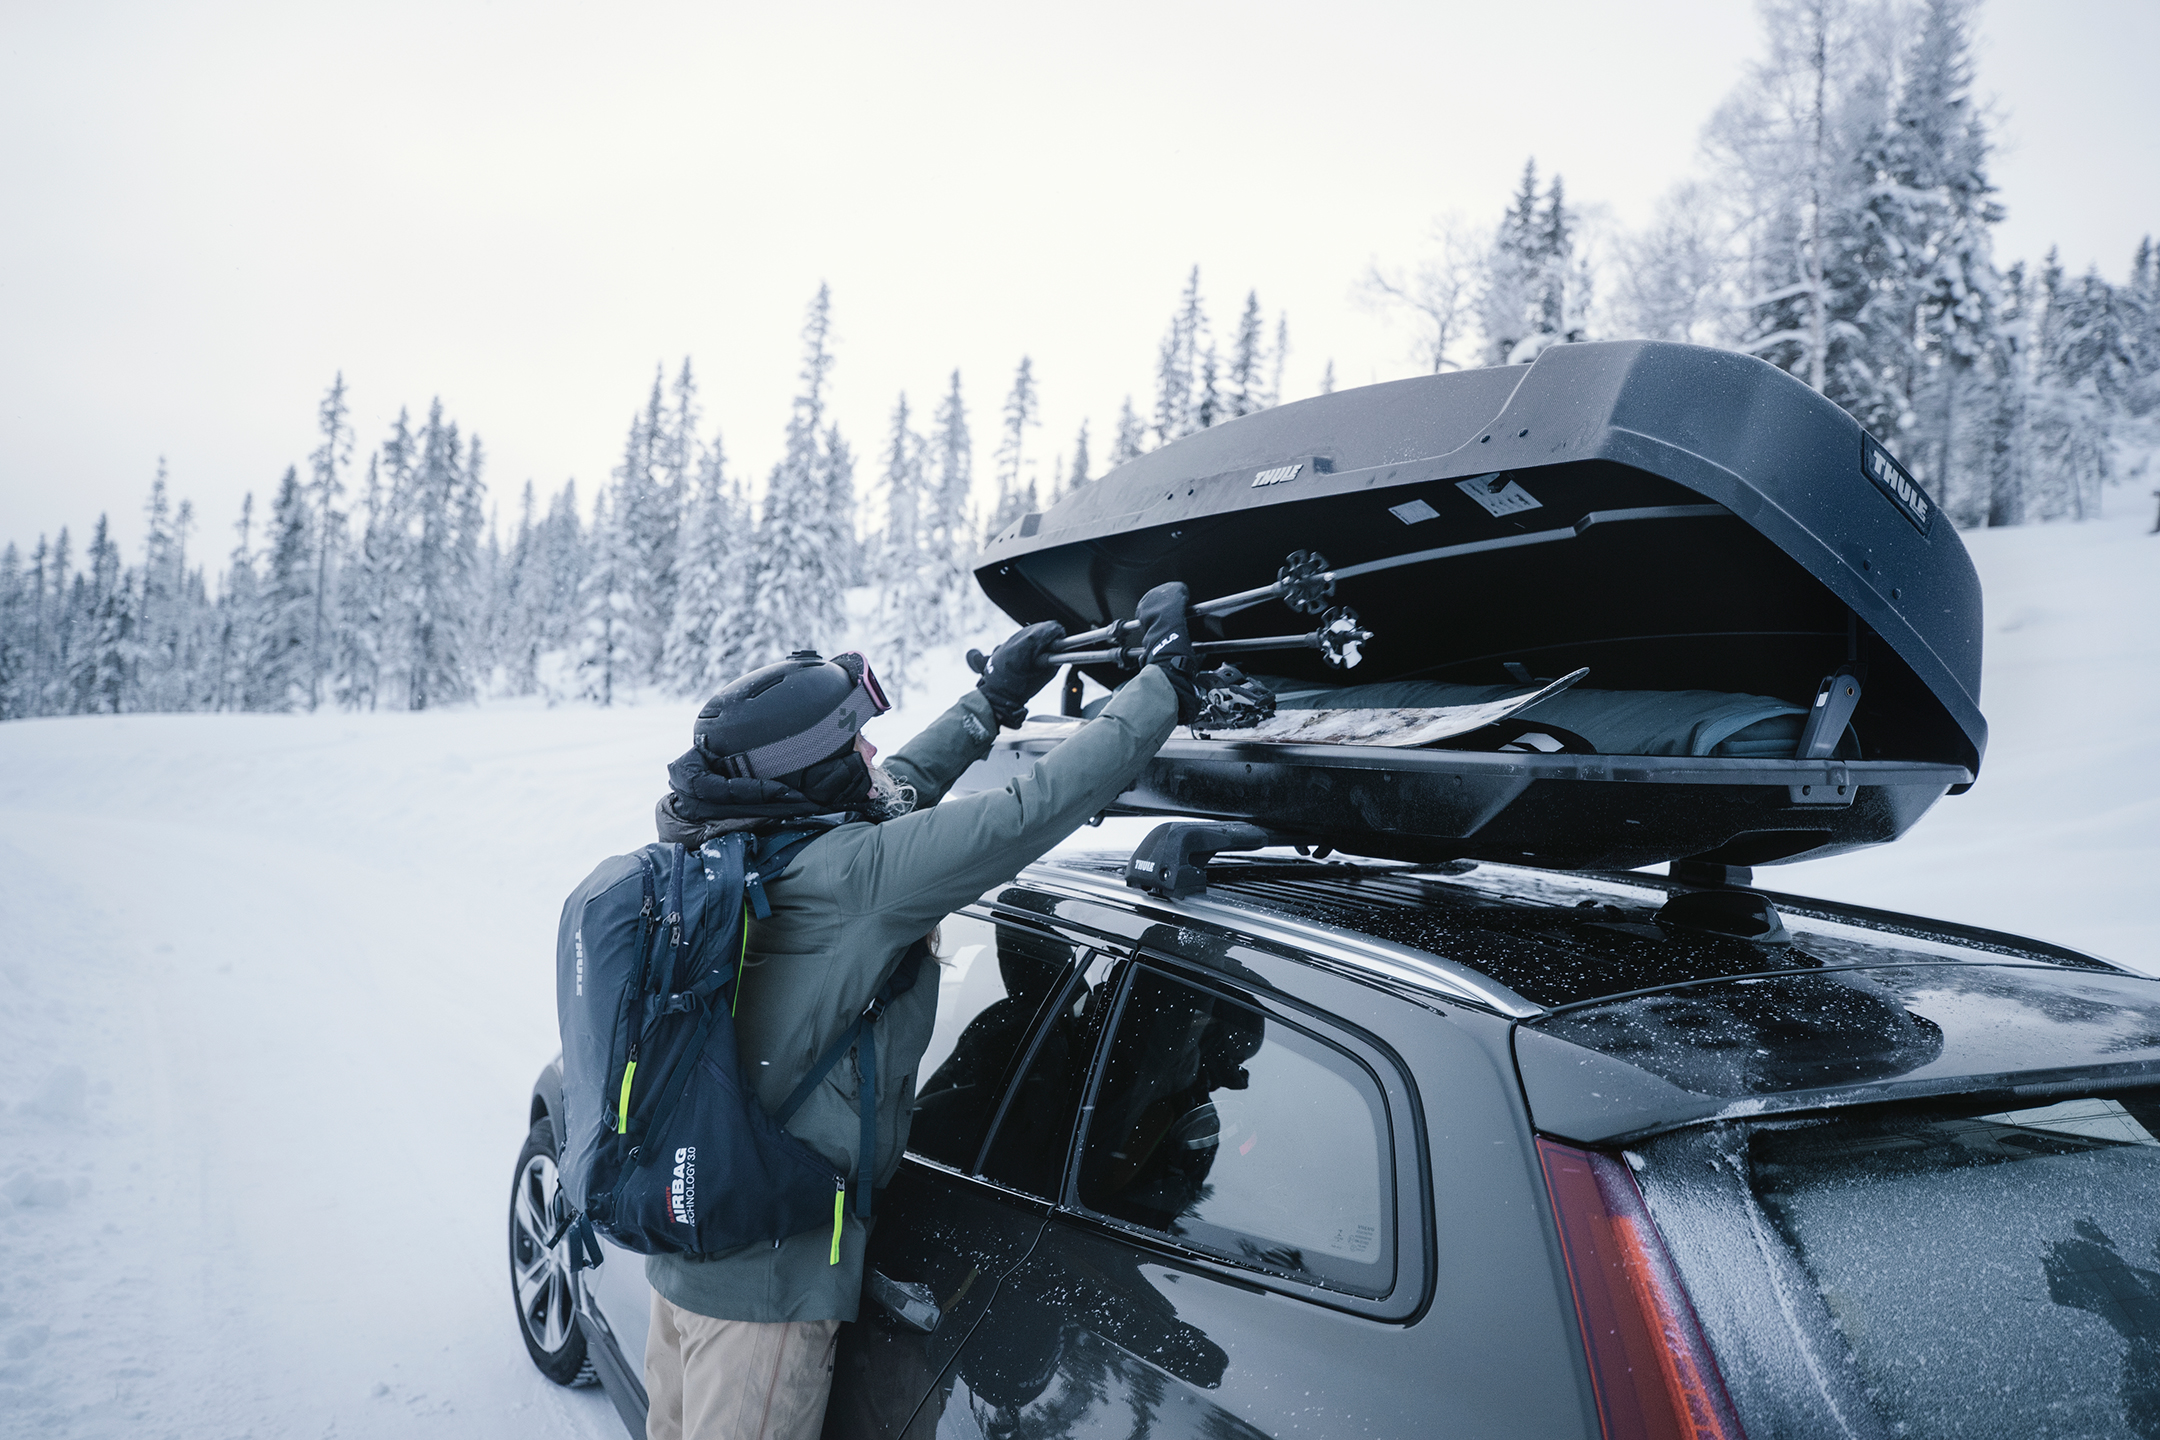 Getting skis out of a roof box 